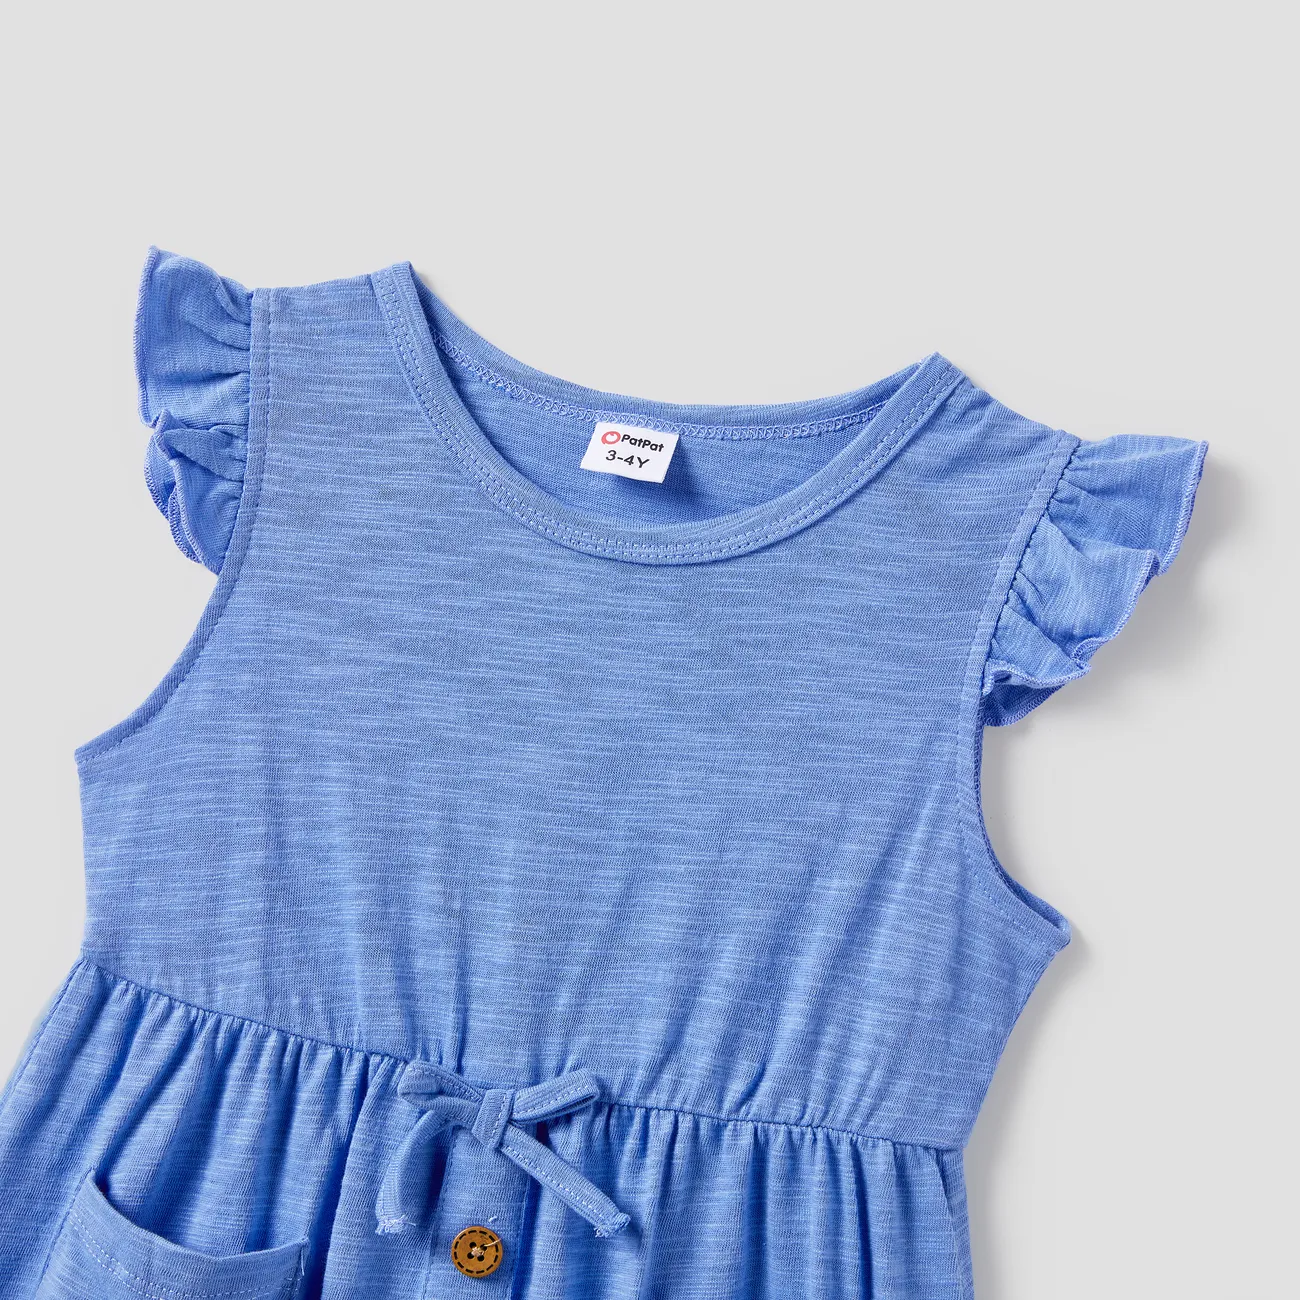 Family Matching Sets Color Block Tee and A-line Tank Dress with Drawstring, Pockets and Buttons  Blue big image 1